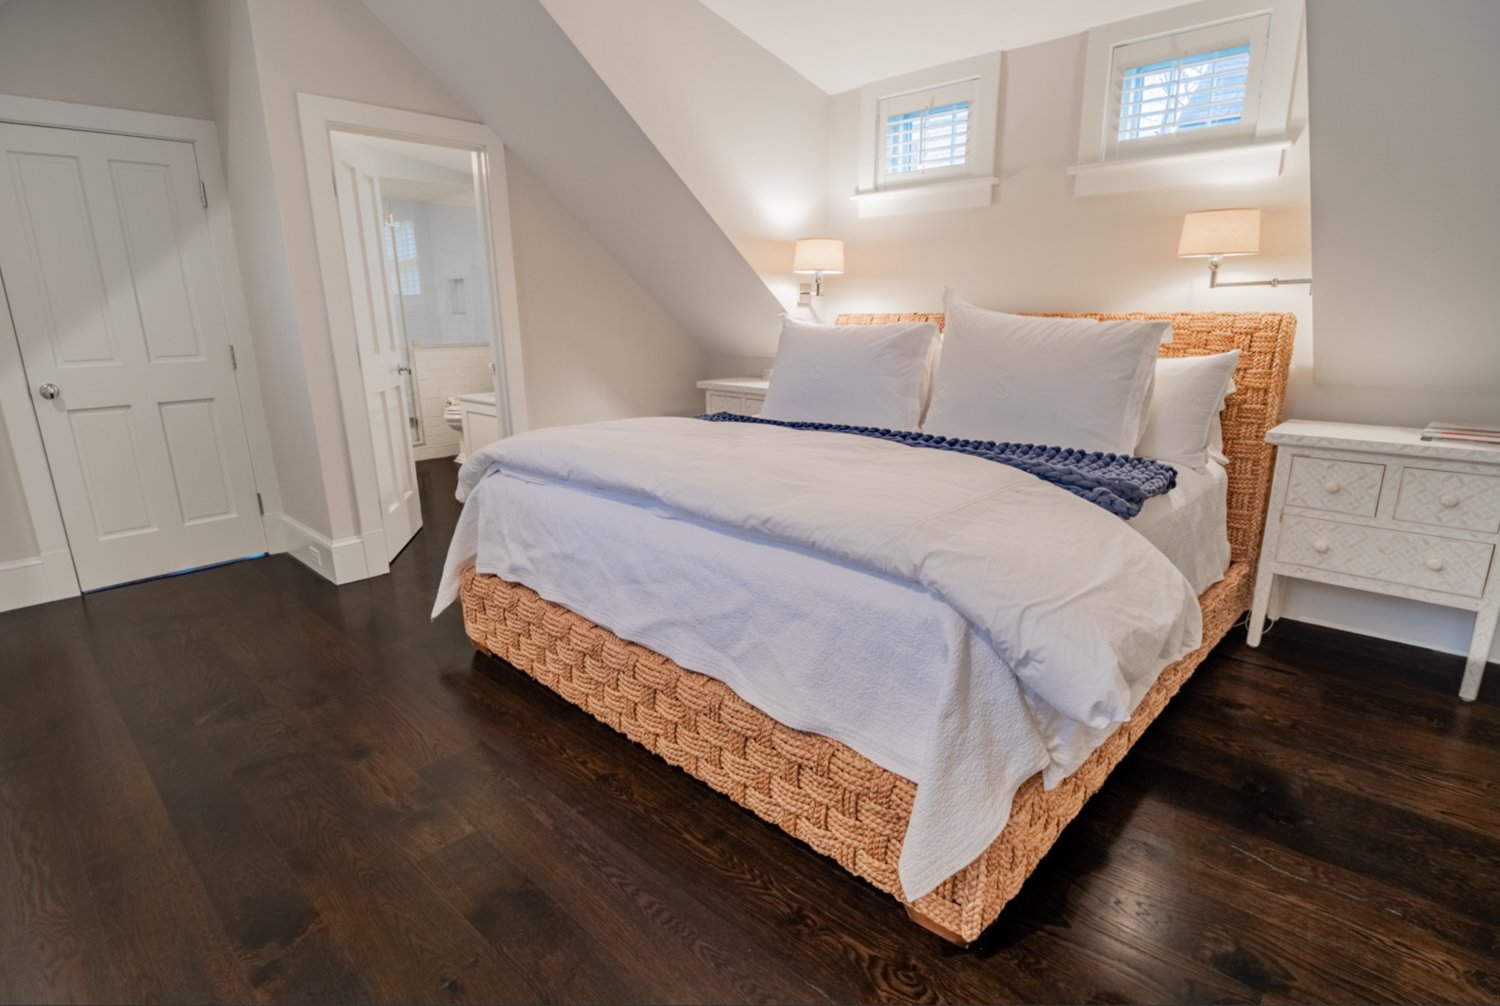 The second-floor master bedroom has a vaulted ceiling and wood floors.